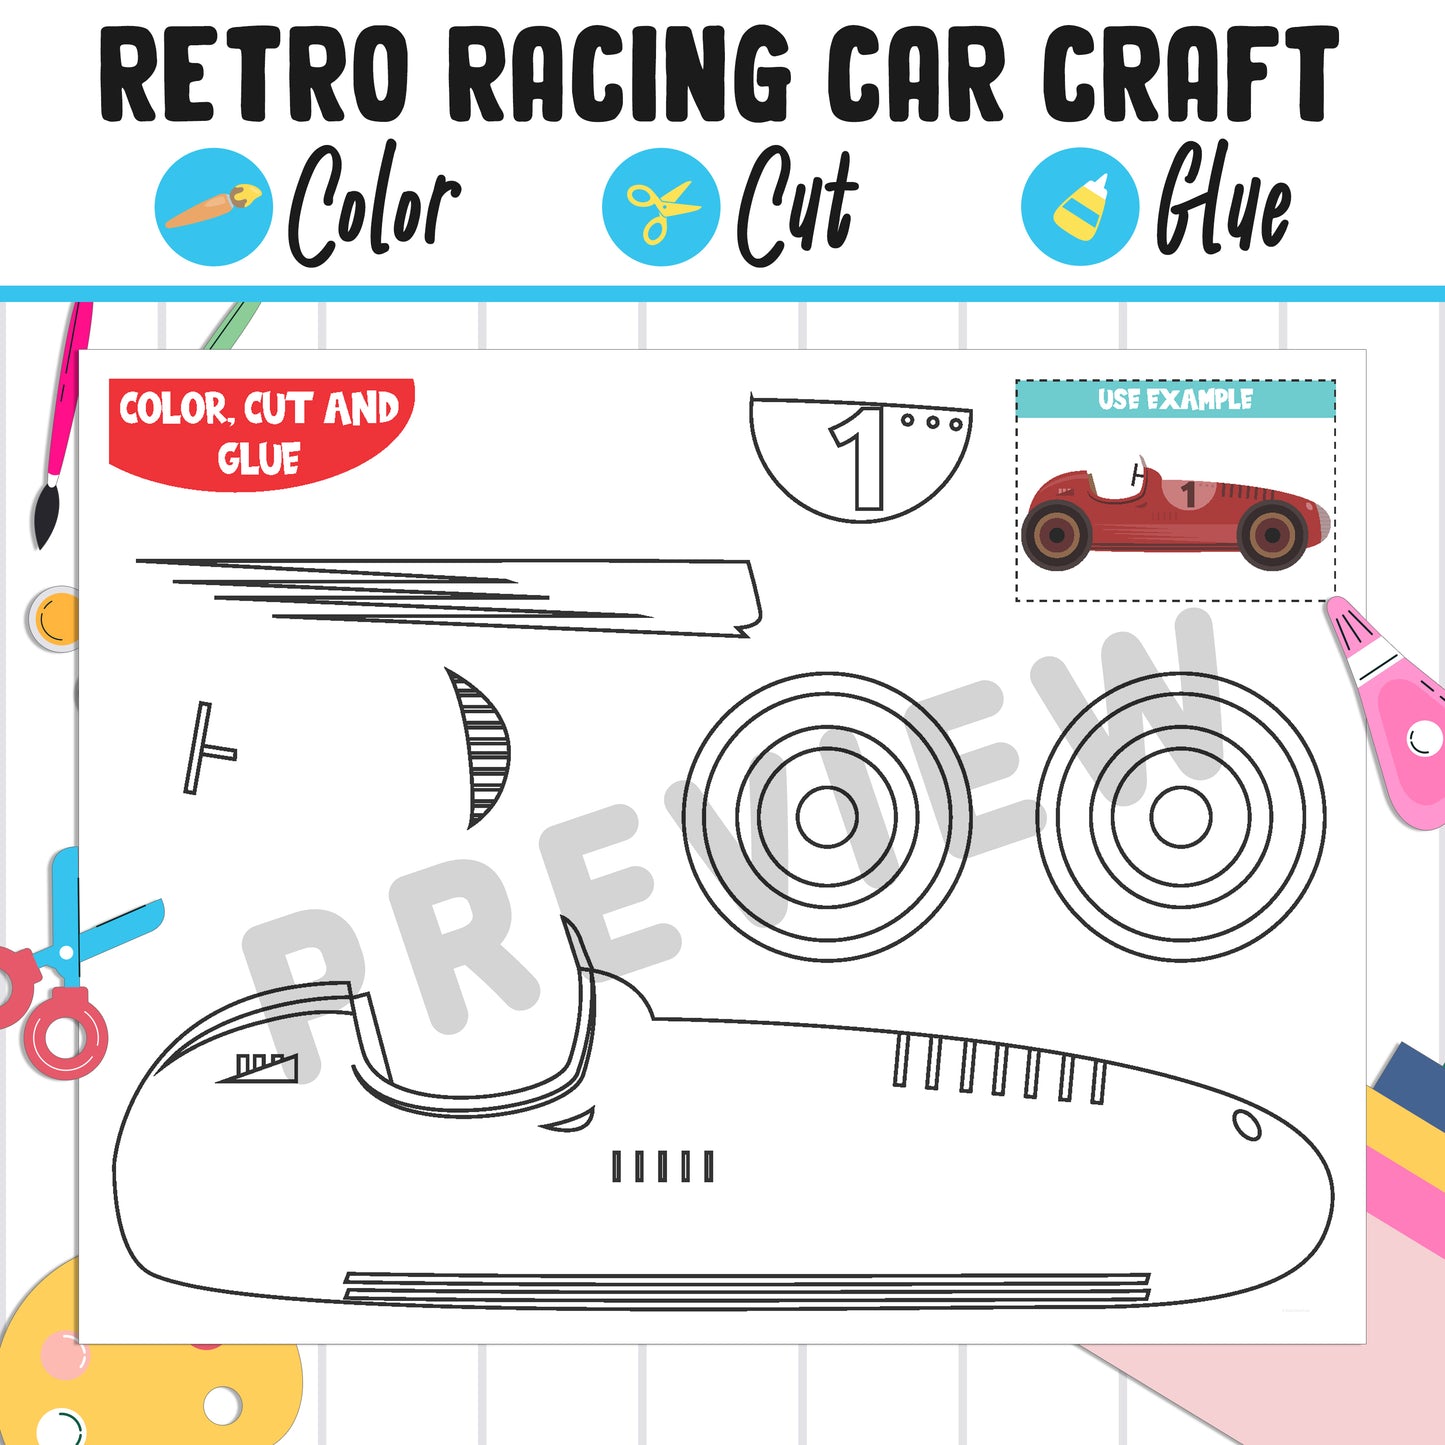 Retro Racing Car Craft Activity - Color, Cut, and Glue for PreK to 2nd Grade, PDF File, Instant Download